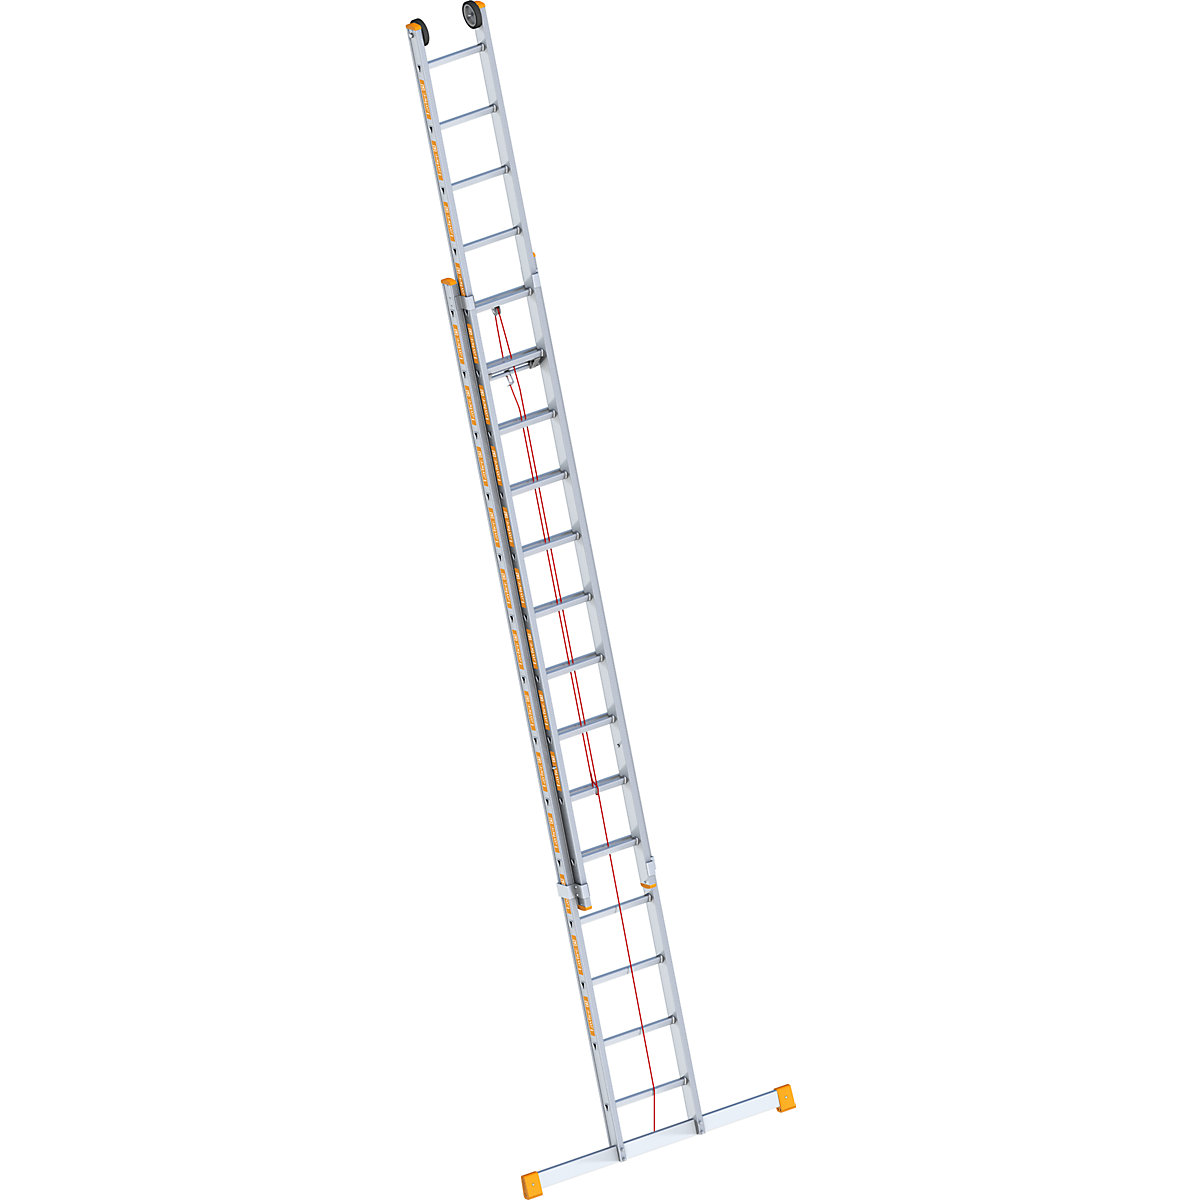 Aluminium rope operated extension ladder - Layher